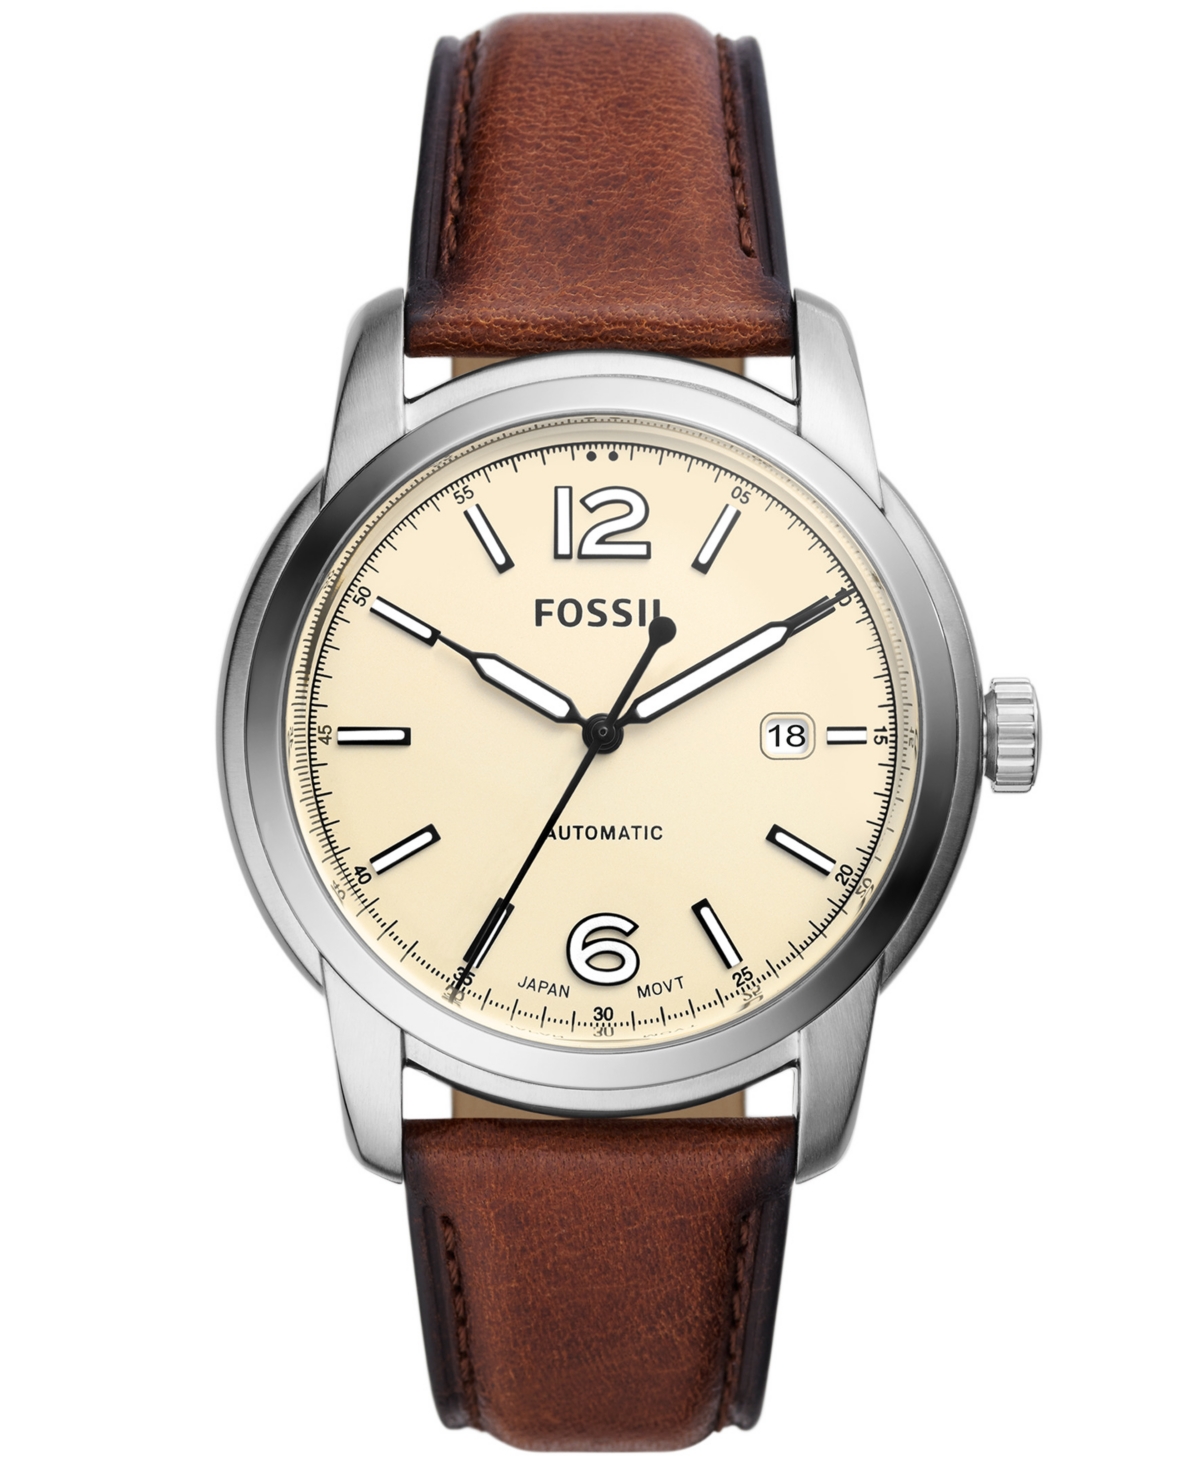 Fossil Men's Heritage Automatic Brown Leather Watch 43mm